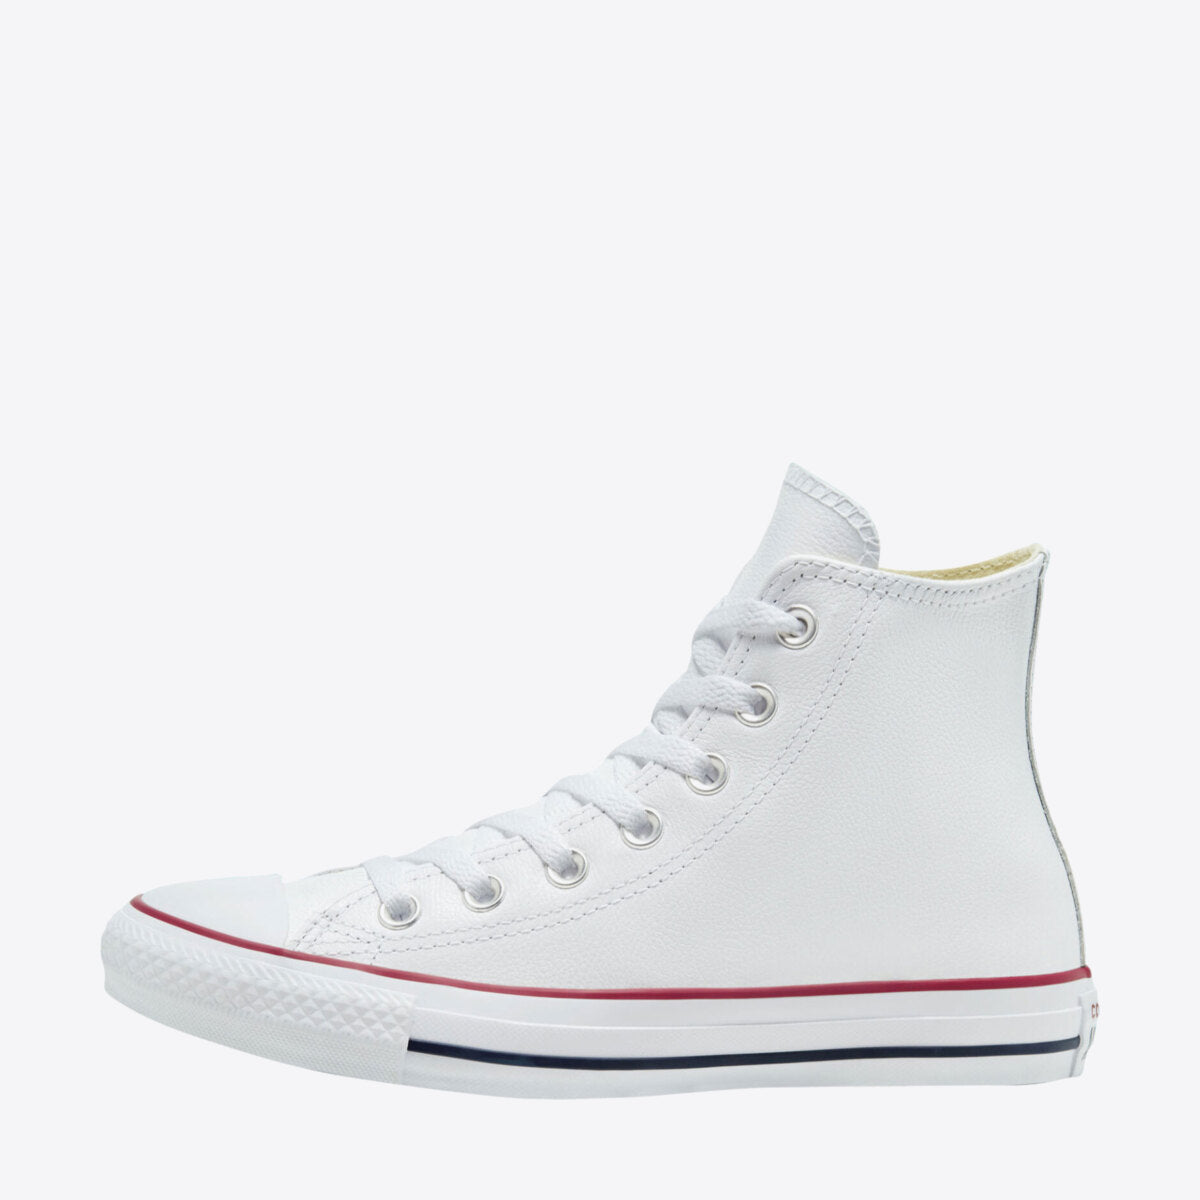 CONVERSE Chuck Taylor All Star Leather High White - Image 5